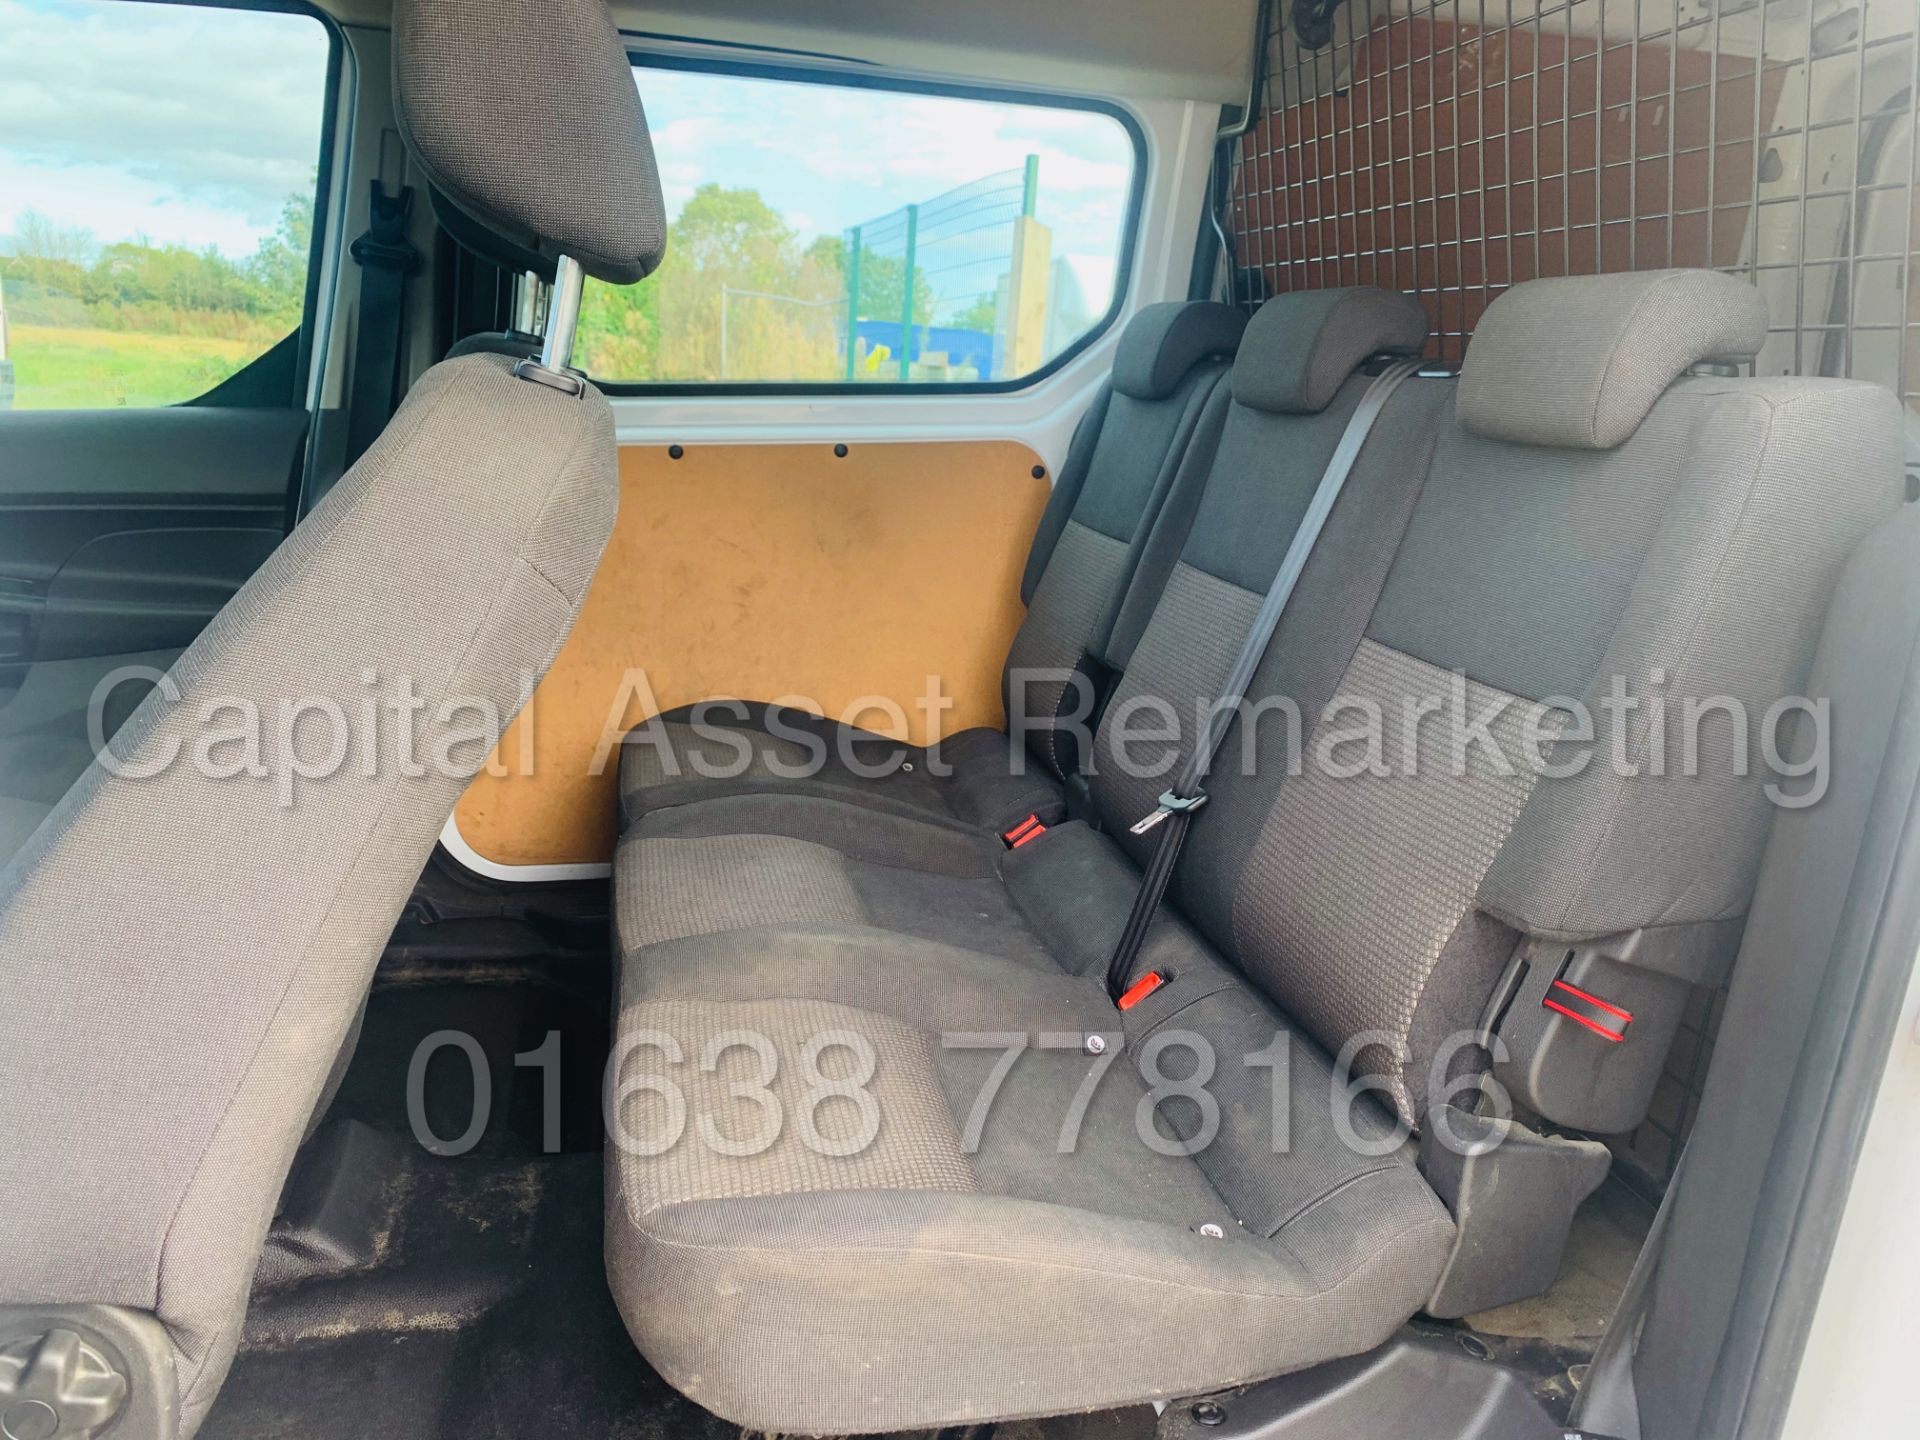 (On Sale) FORD TRANSIT CONNECT *LWB - 5 SEATER CREW VAN* (67 REG - EURO 6) 1.5 TDCI *A/C* (1 OWNER) - Image 22 of 40